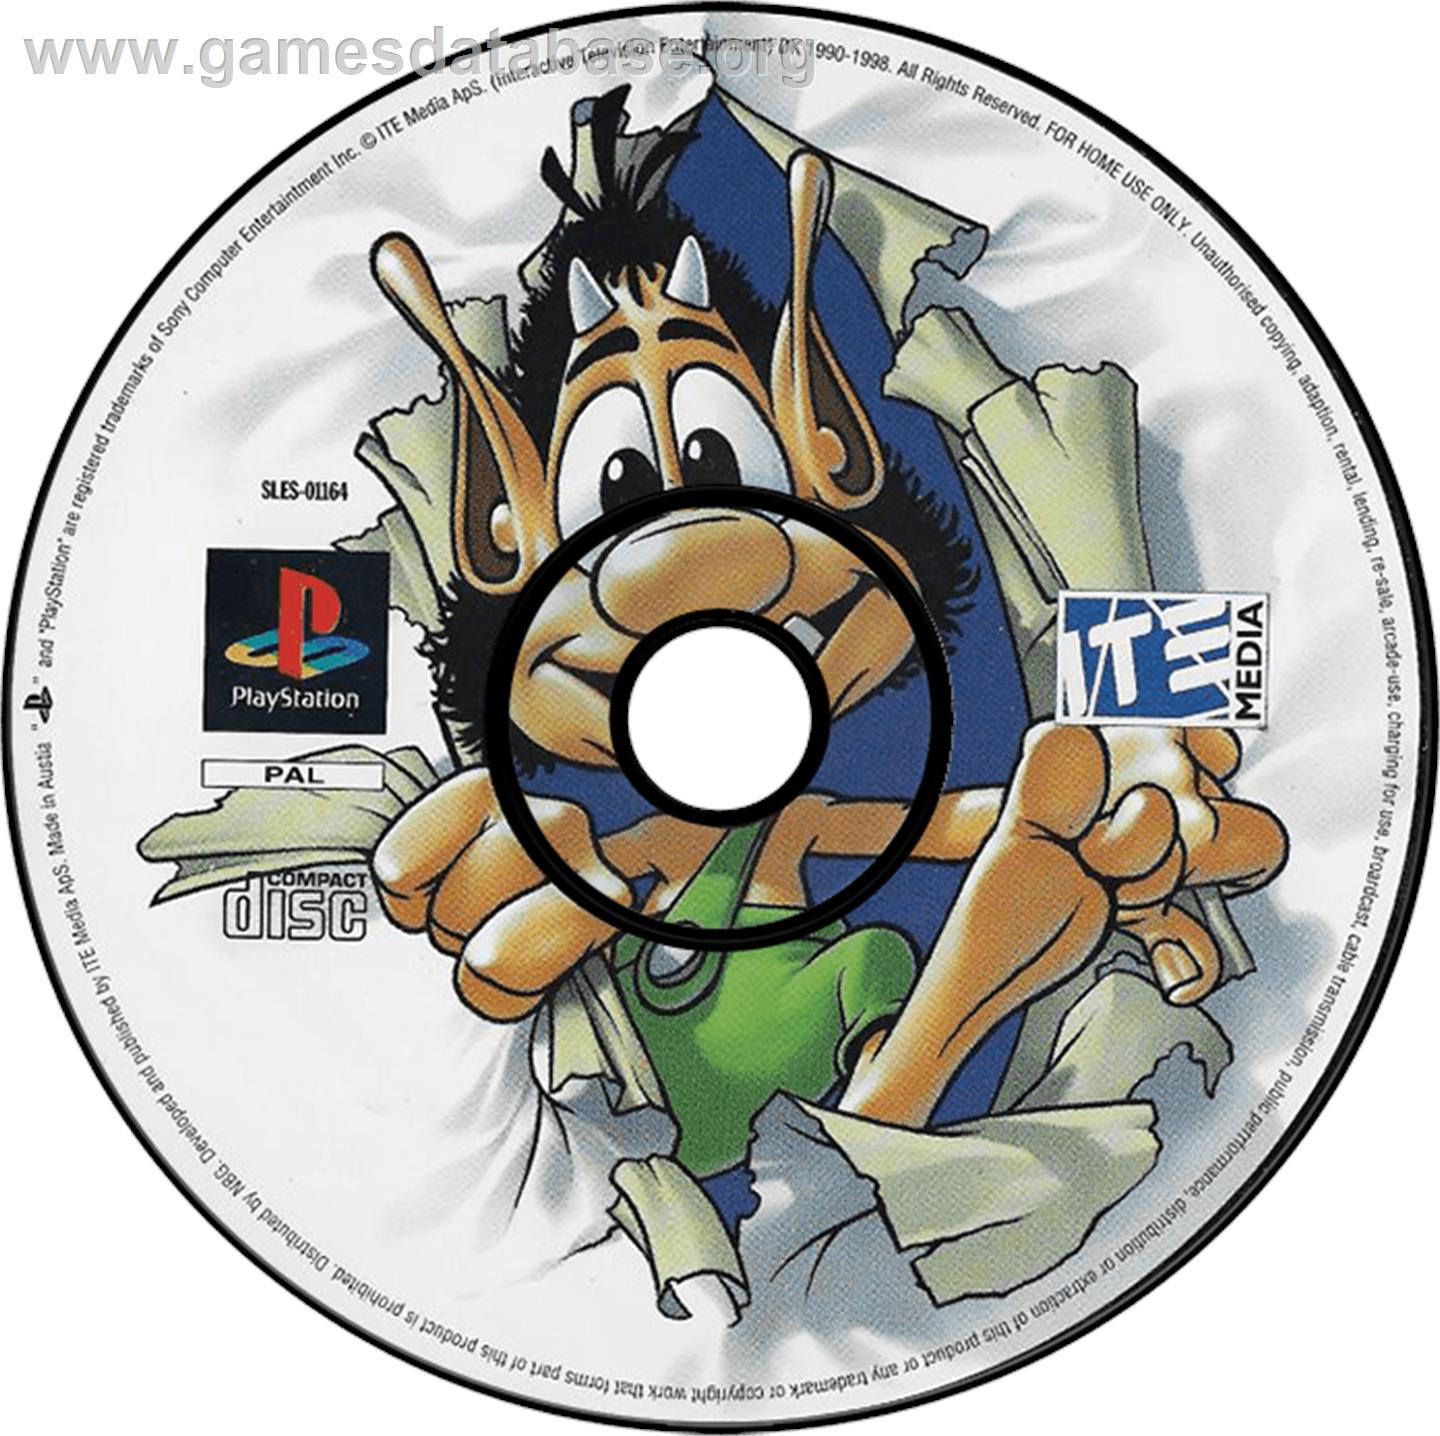 Hugo: The Quest for the Sunstones - Sony Playstation - Artwork - Disc